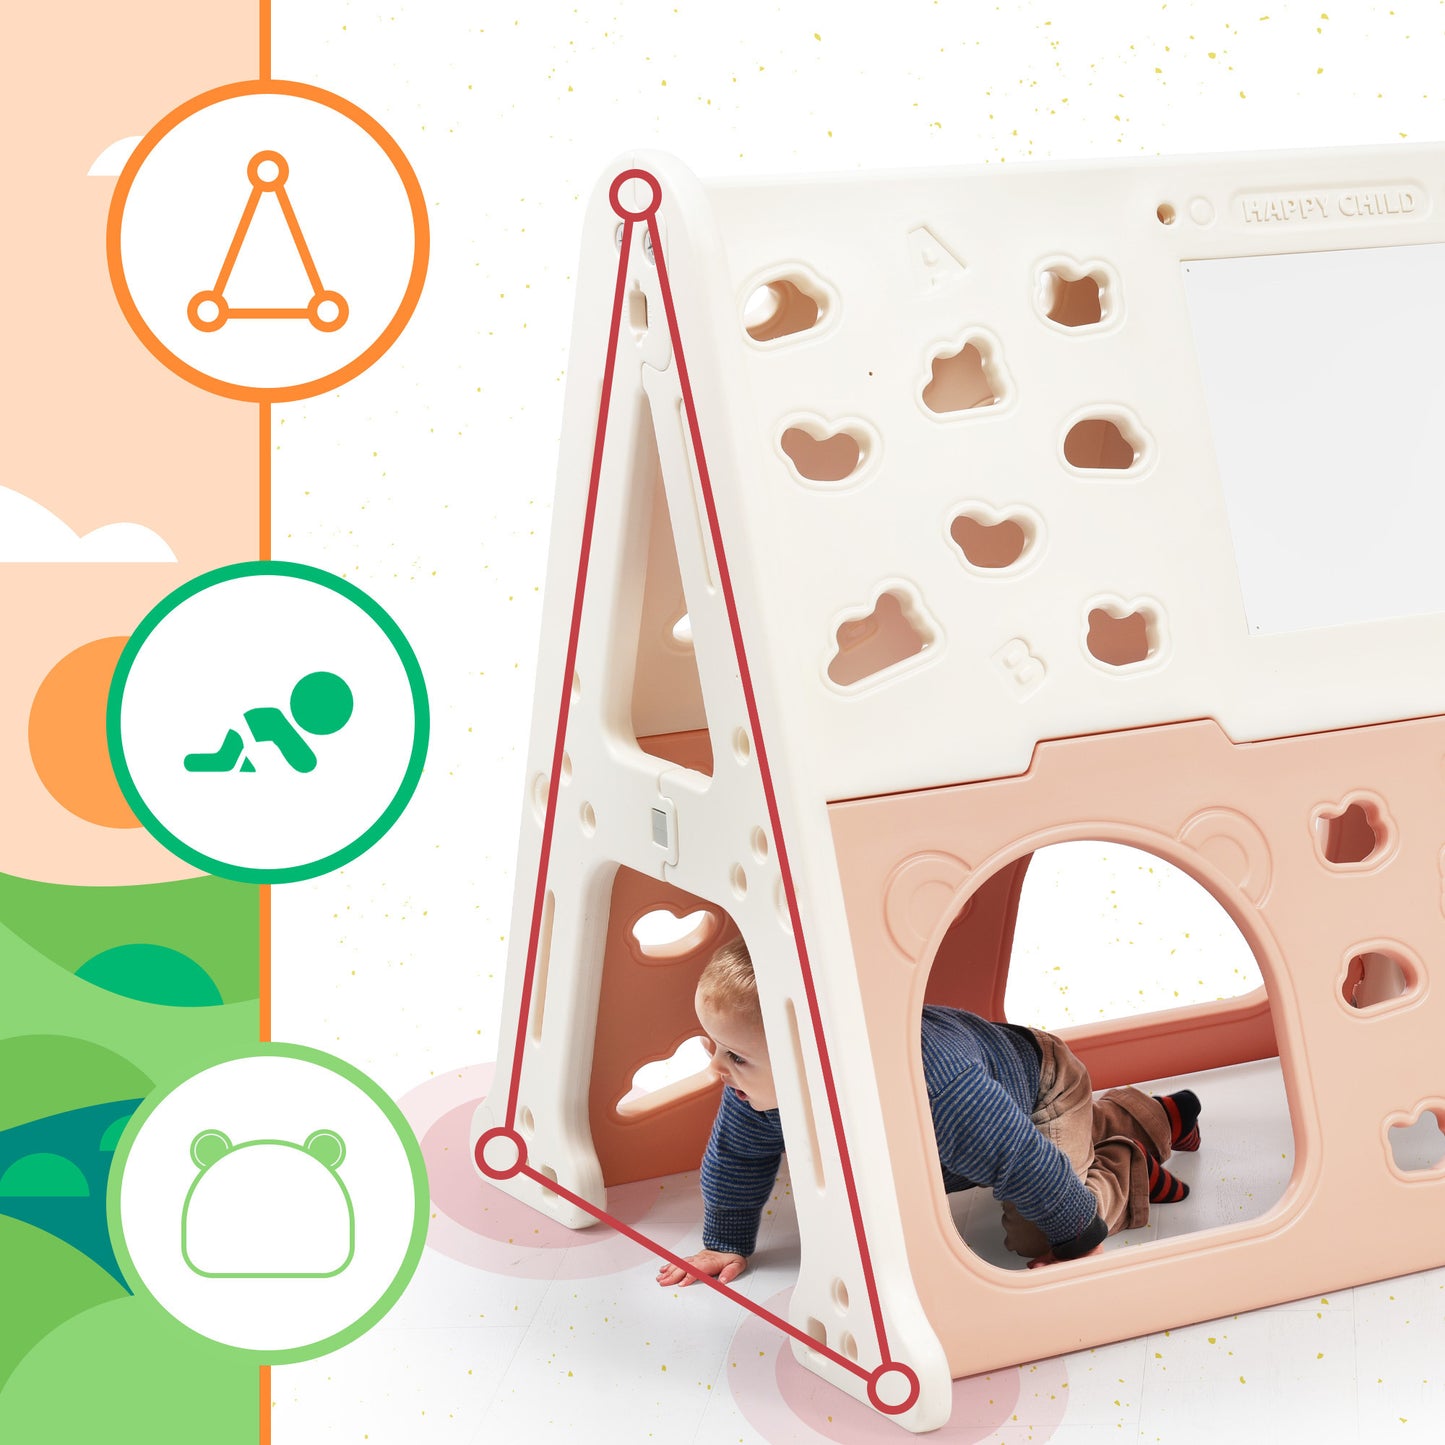 5-in-1 Toddler Climber Basketball Hoop Set Kids Playground Climber Playset with Tunnel, Climber, Whiteboard,Toy Building Block Baseplates, Combination for Babies